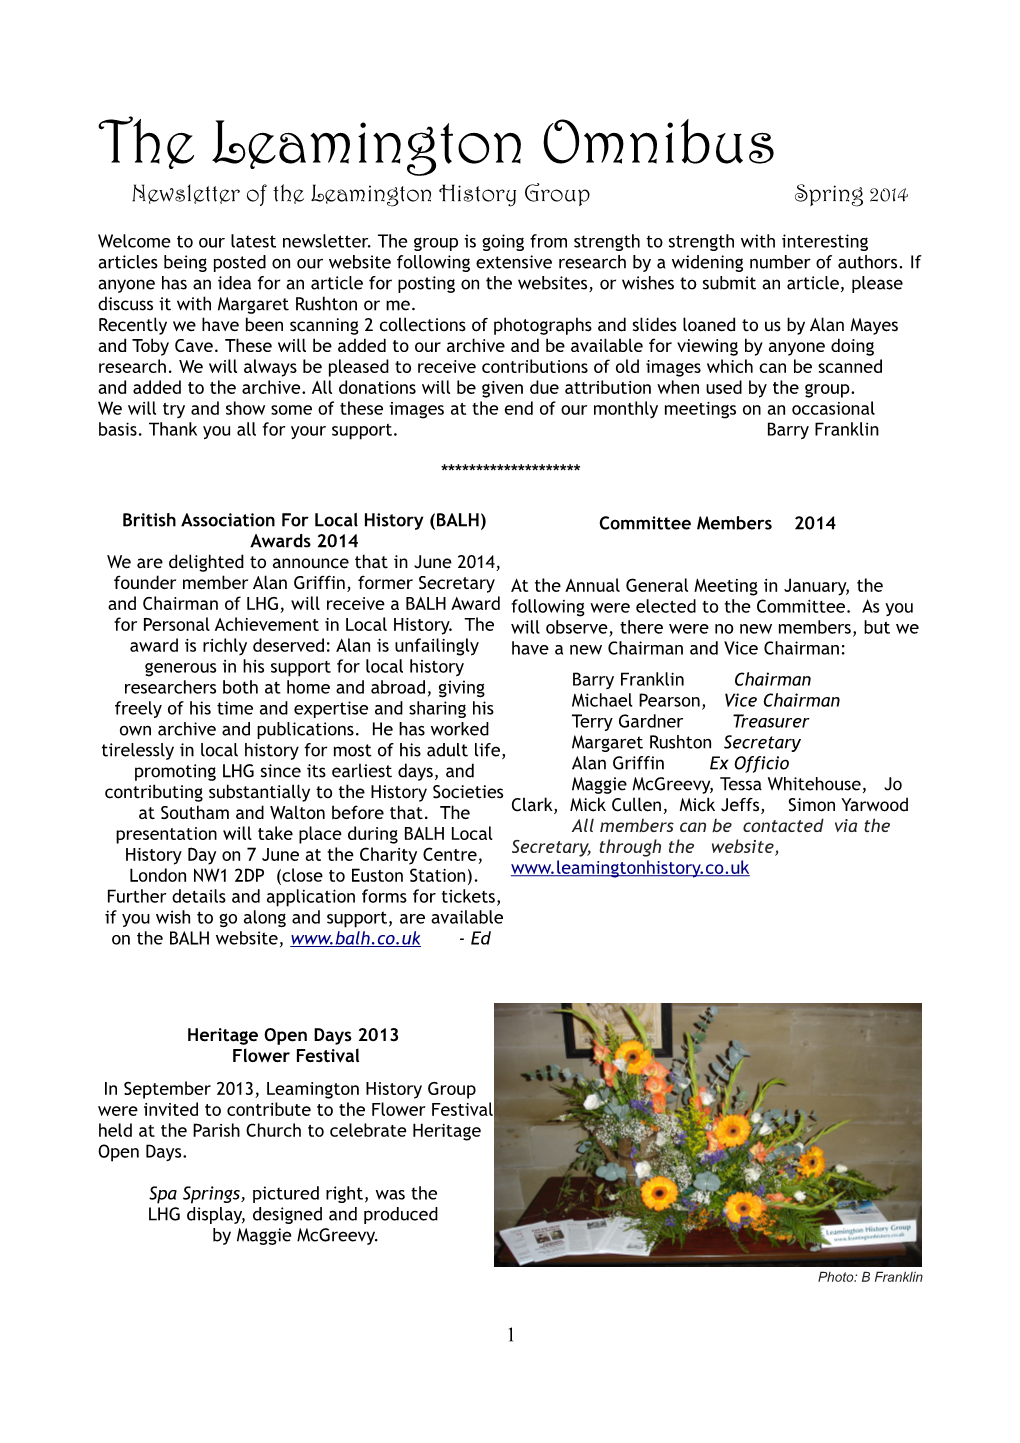 The Leamington Omnibus Newsletter of the Leamington History Group Spring 2014